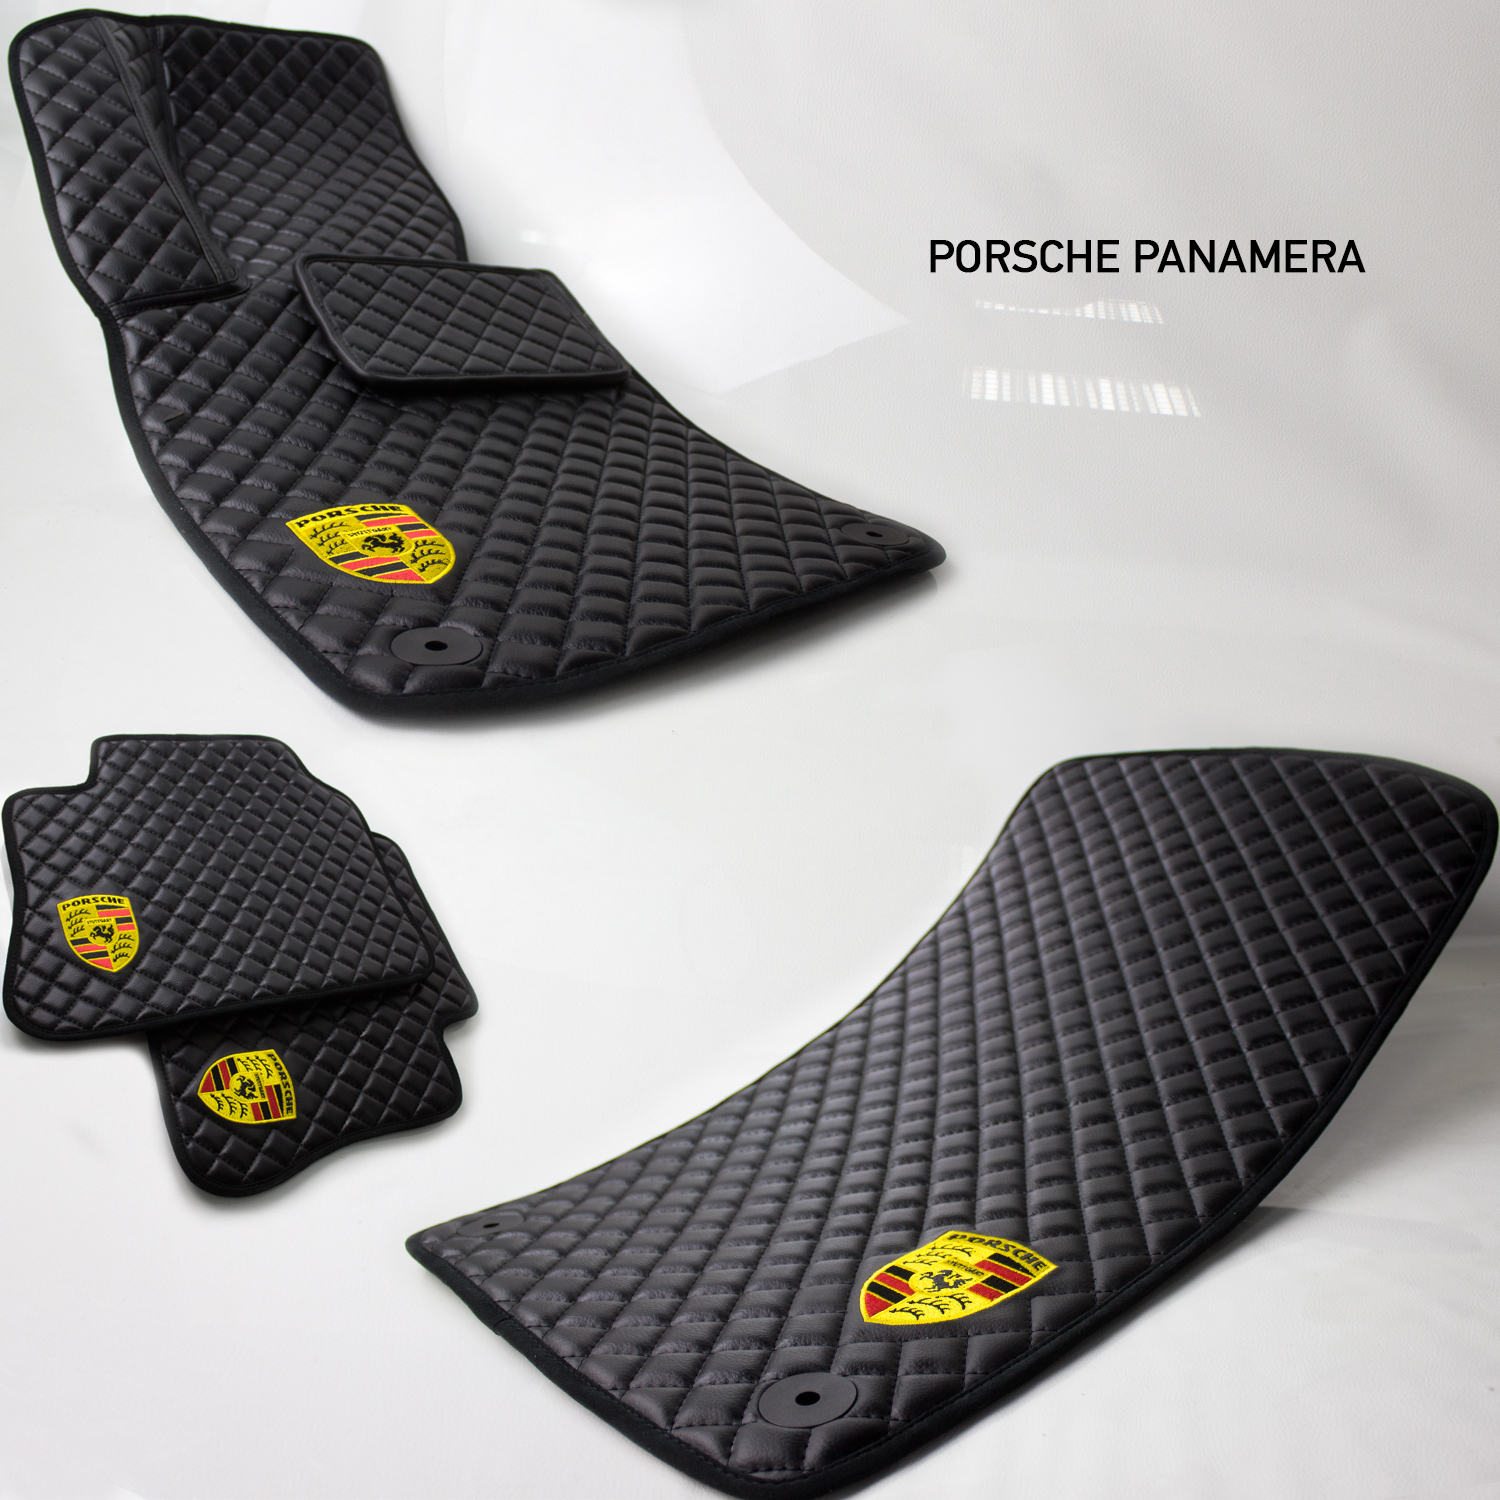 images-products-1-8063-232988543-panamera.jpg